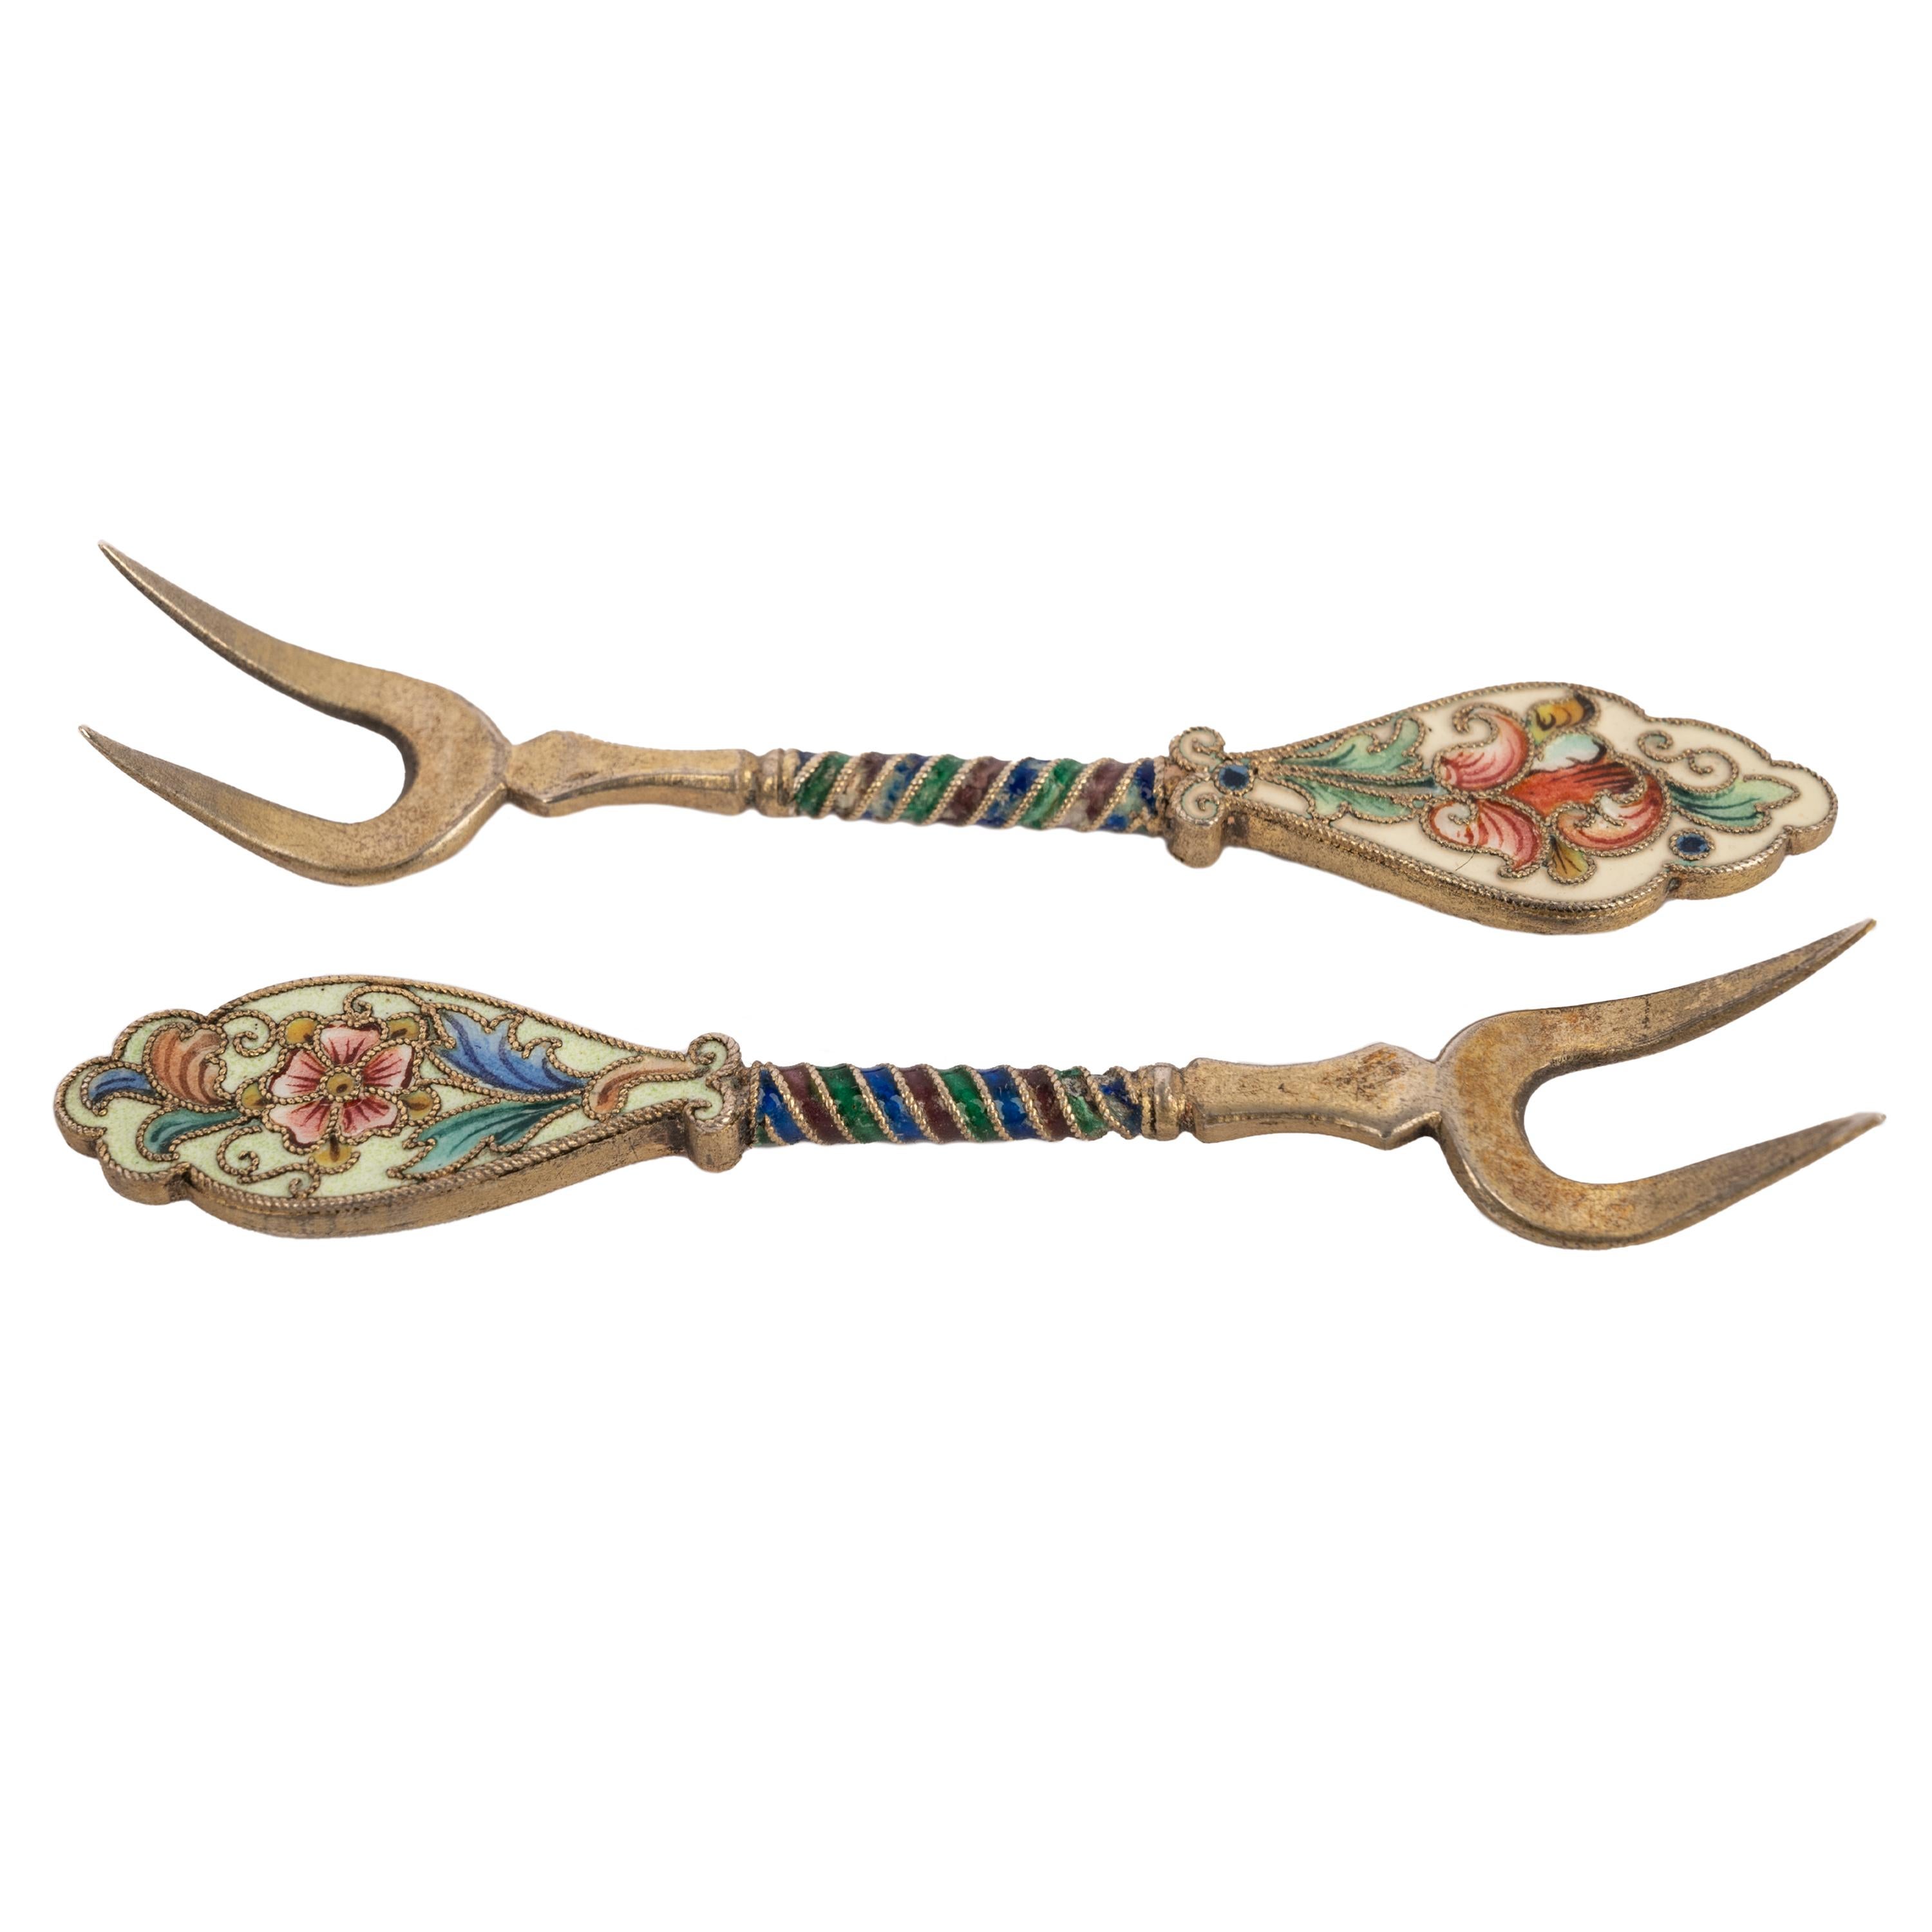 A pair of antique Imperial Russian Cloisonné & silver gilt forks, by Faberge Workmaster Feodor Ruckert for Faberge, circa 1910.
Each fork is finely decorated with muti-colored floral cloisonné to the front and rear, the forks having a spiral stem